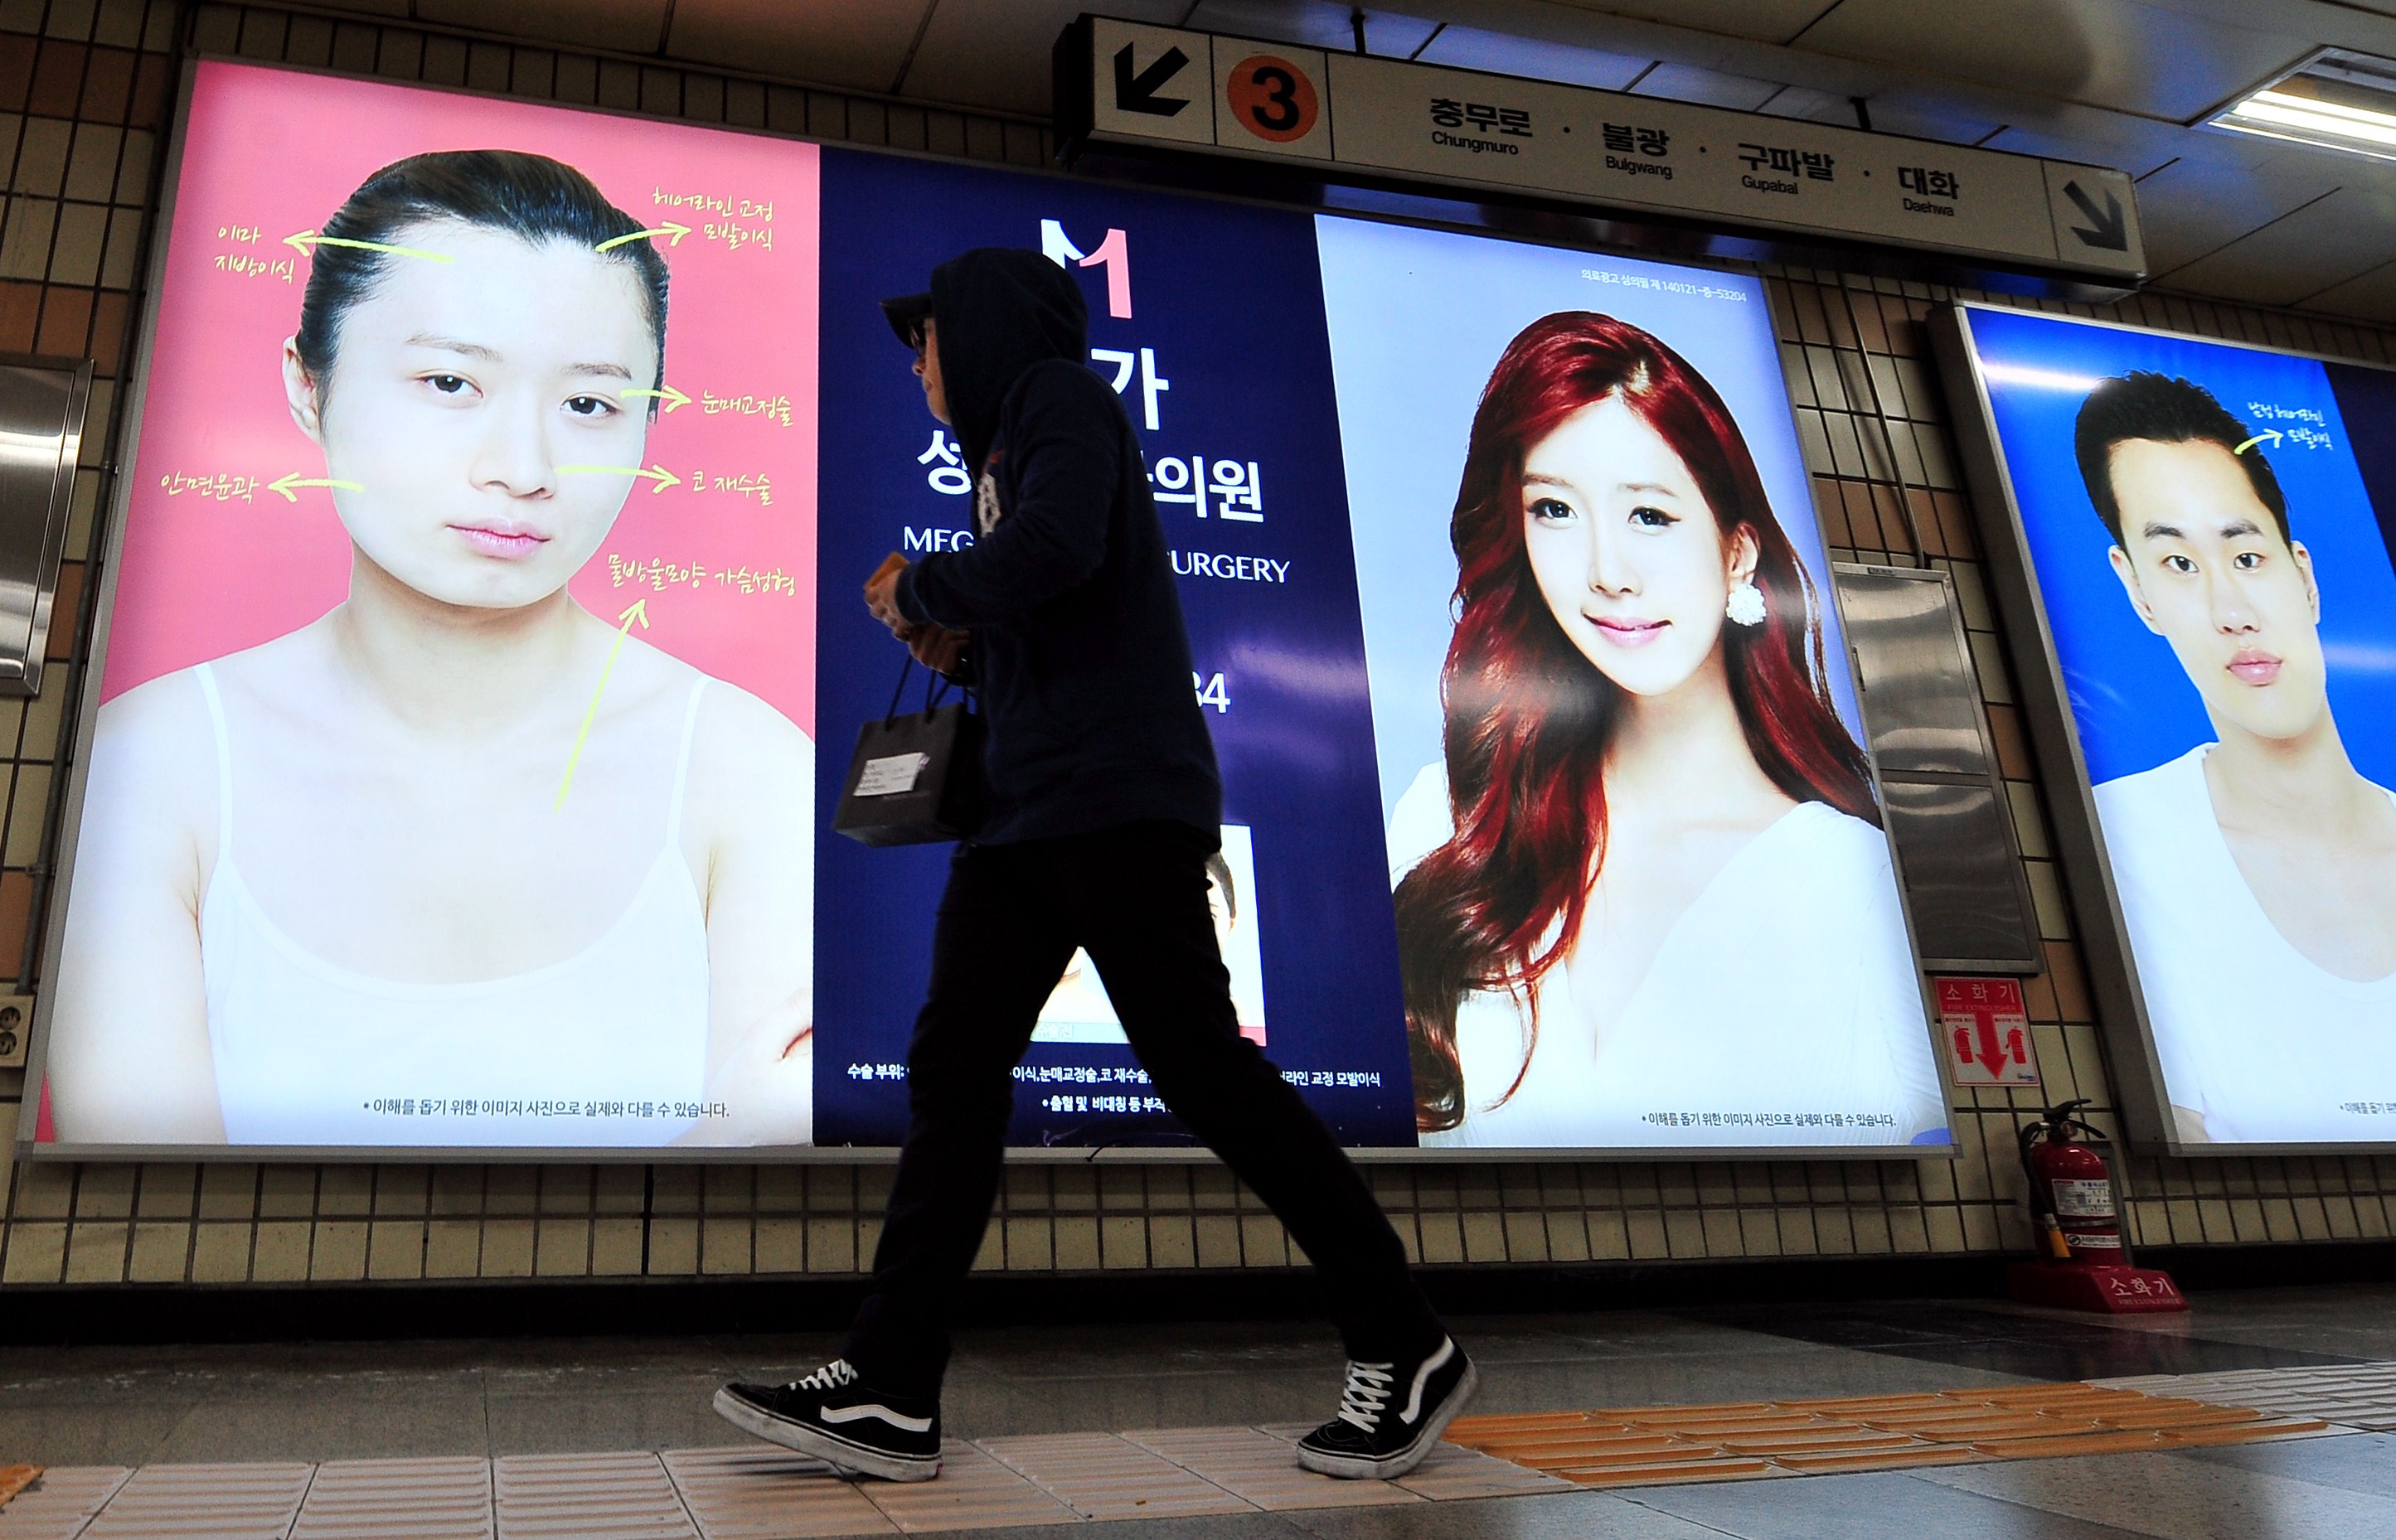 A pedestrian walks past advertisements for plastic surgery clinics at a subway station in Seoul in March 2014. (Jung Yeon-je—AFP/Getty Images)